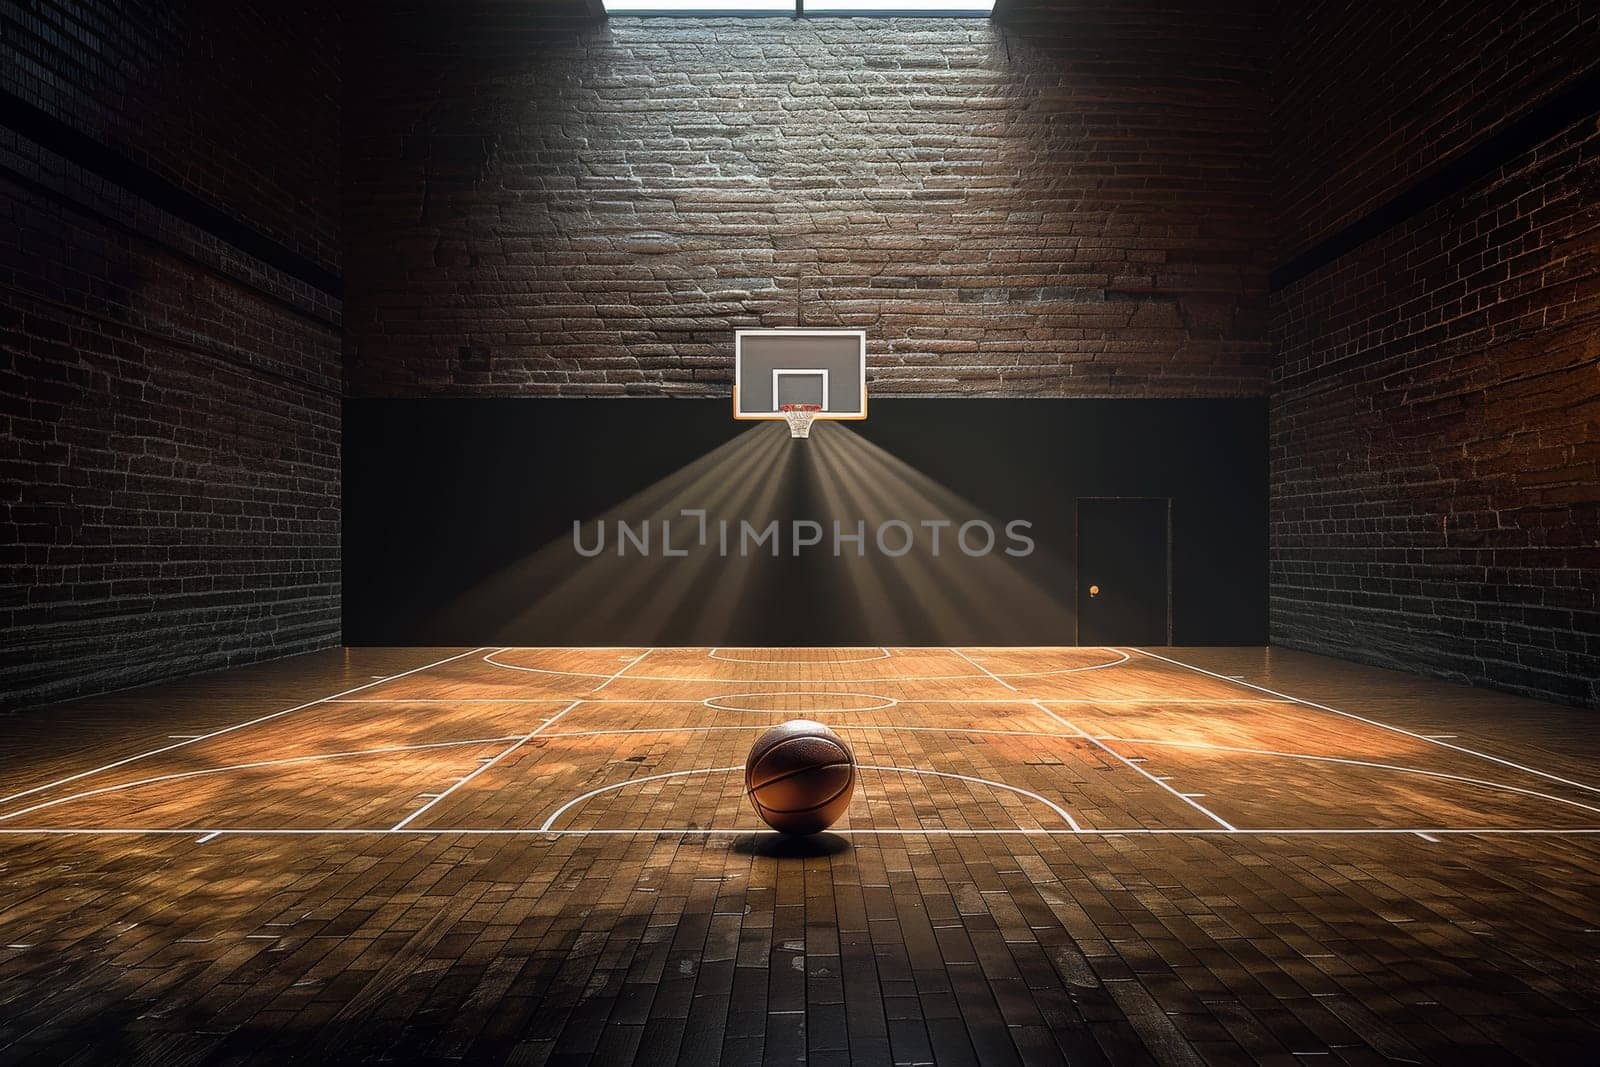 A basketball is sitting on the court in a dimly lit gym. The ball is the only object in the scene, and the atmosphere is quiet and still